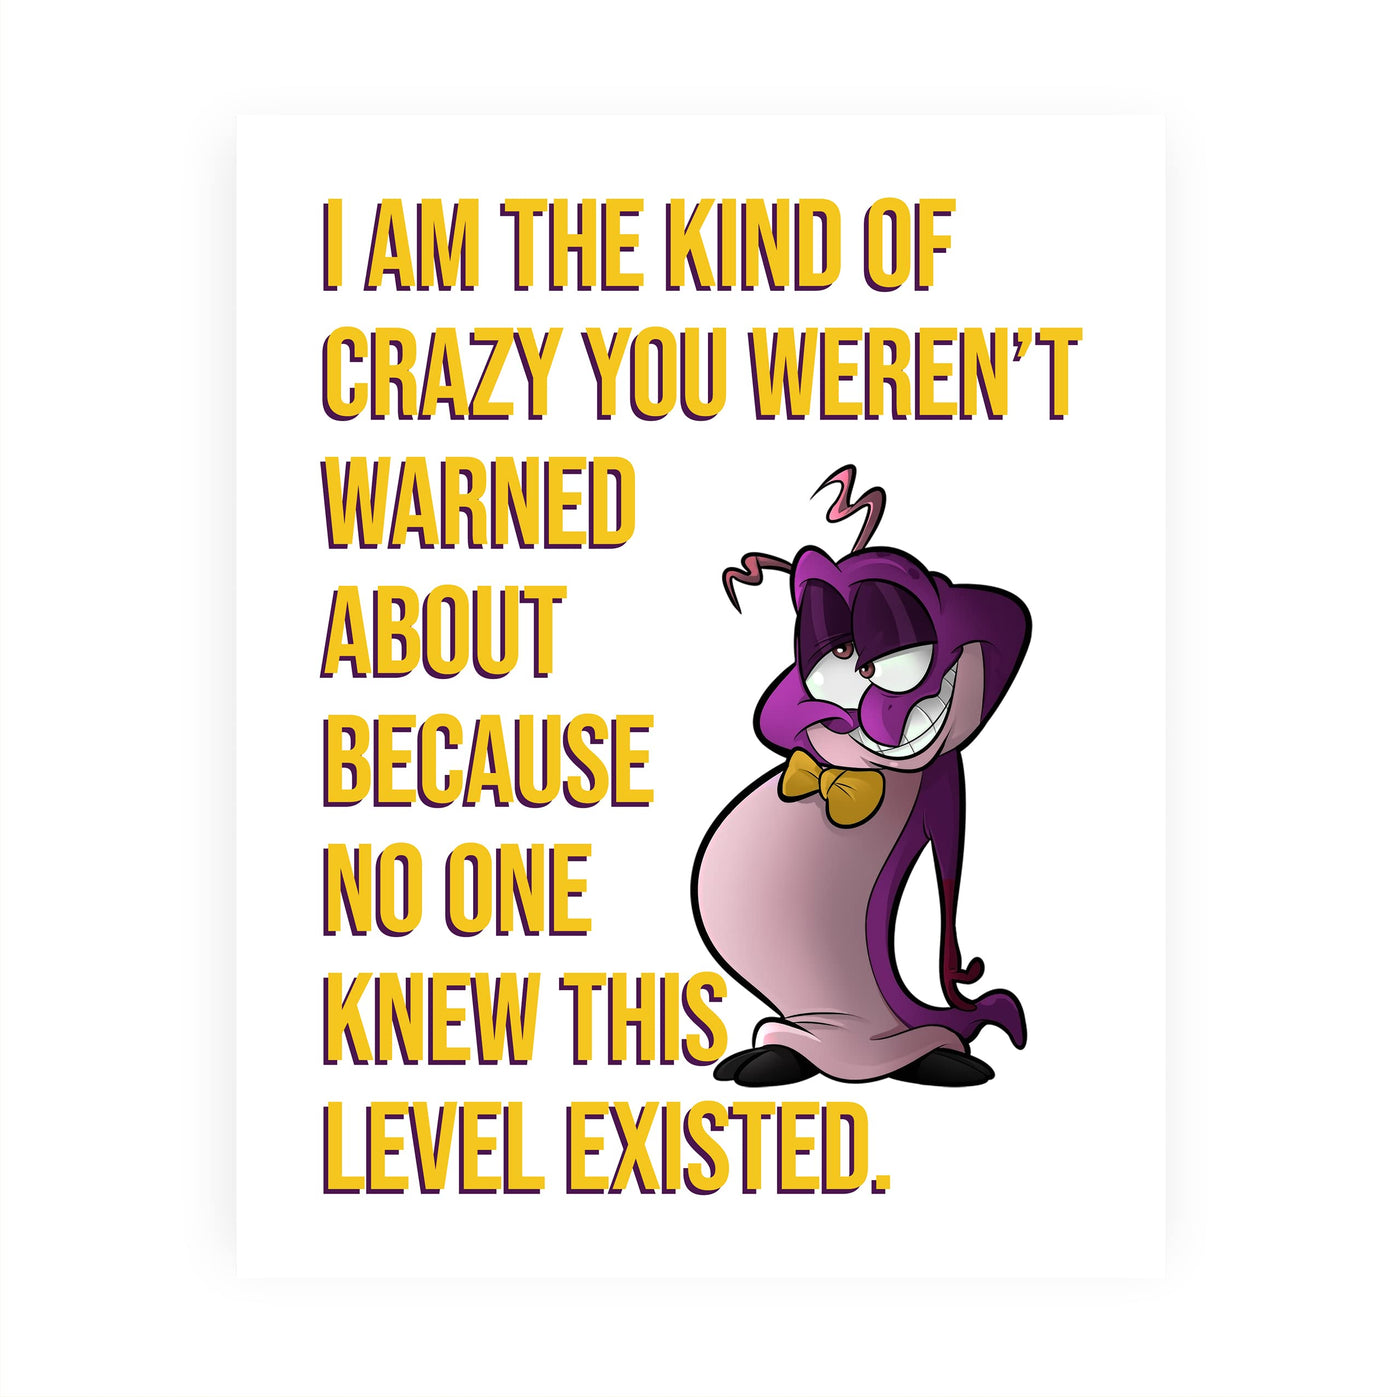 I'm the Kind of Crazy You Weren't Warned About Funny Wall Decor Sign -8 x 10" Sarcastic Art Print -Ready to Frame. Humorous Decoration for Home-Office-Bar-Man Cave-Pub Decor. Fun Novelty Gift!